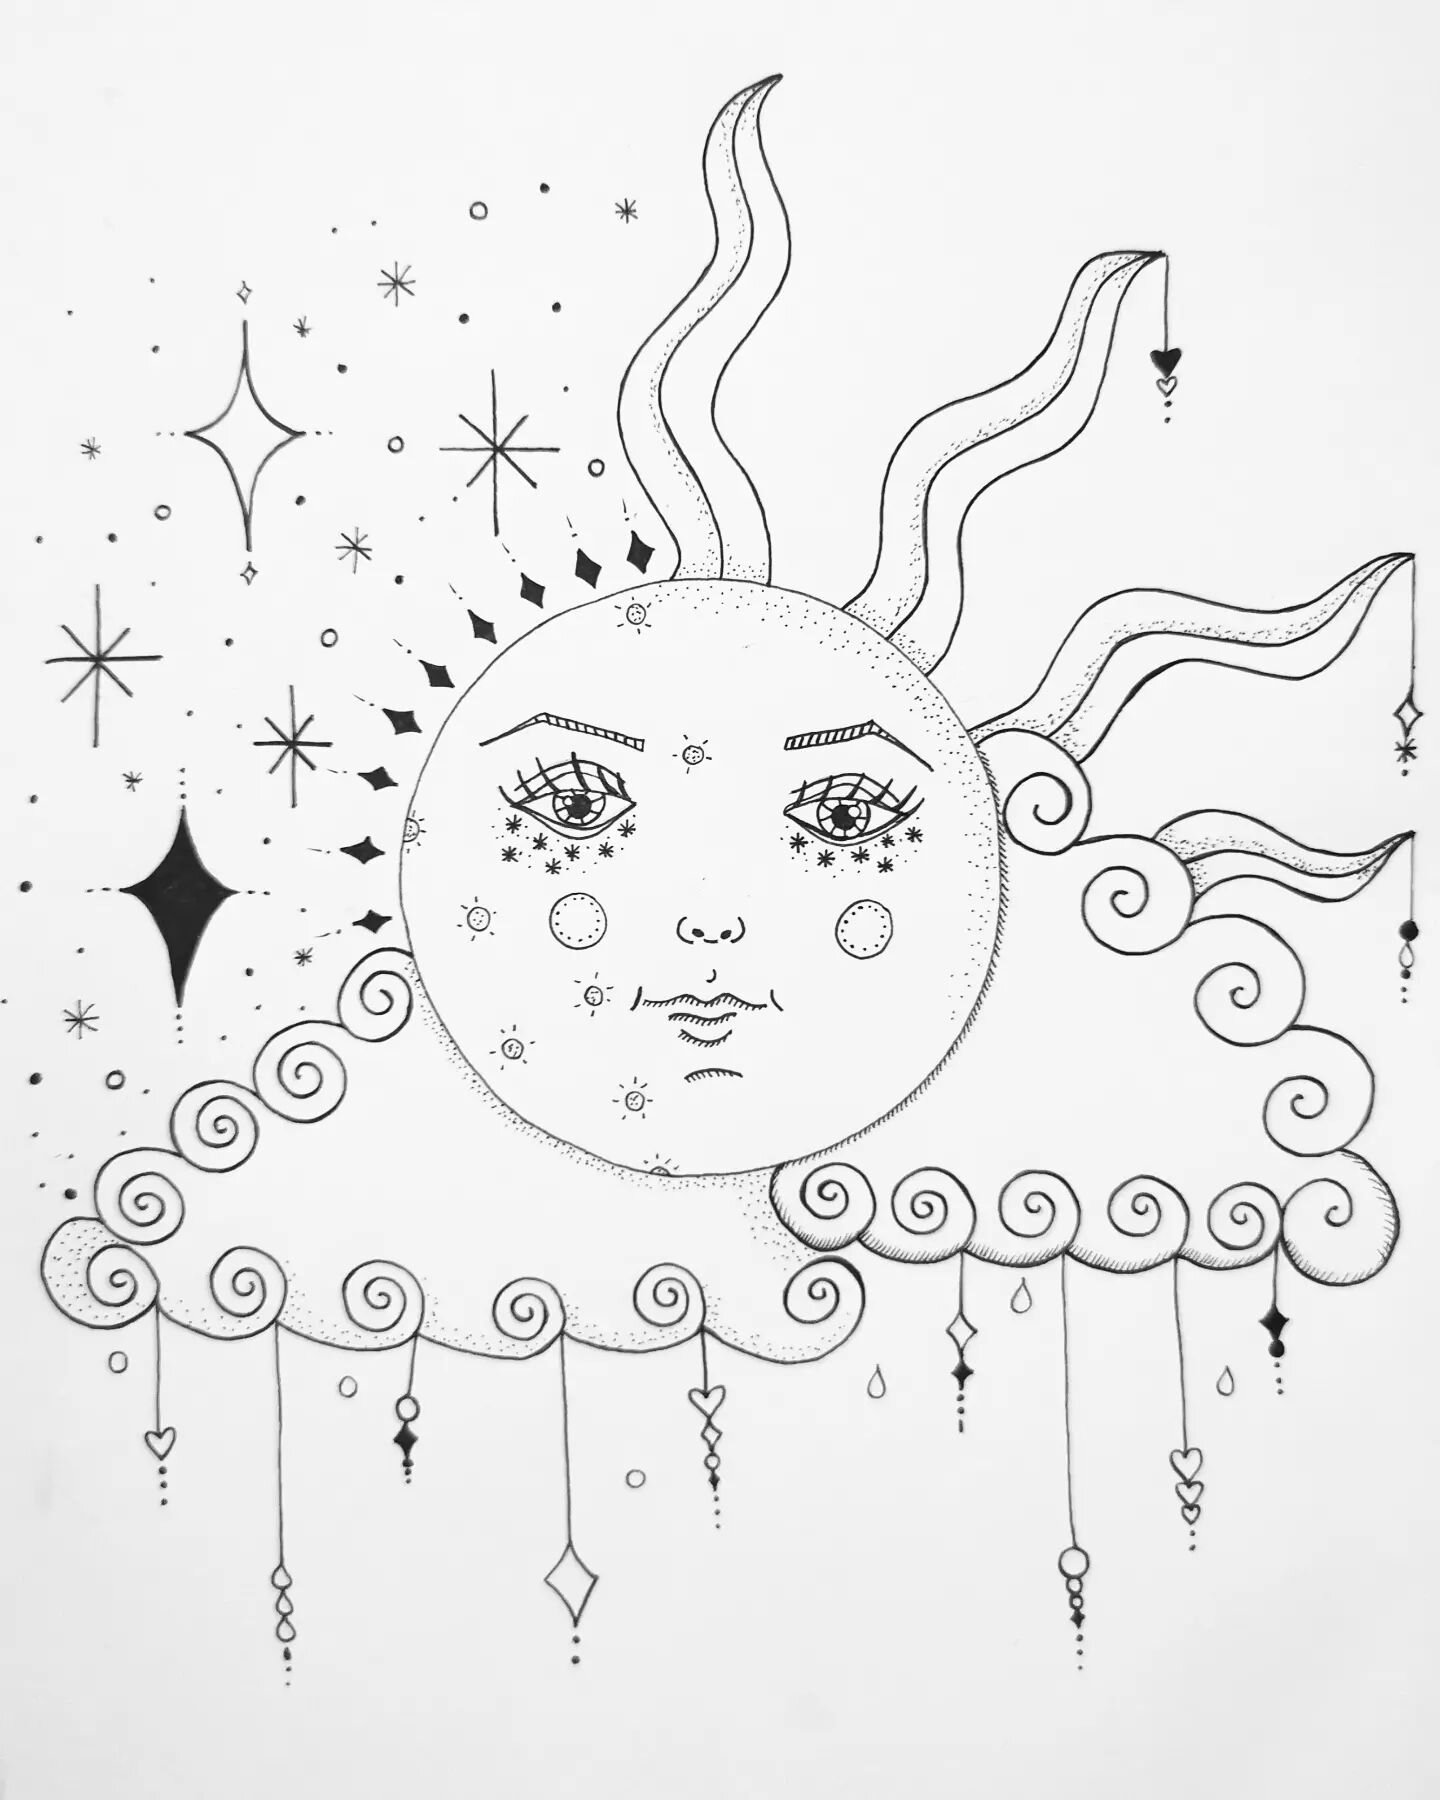 A simple astrological design today!🌞🌜🖤

I love doing this style! Let me know if you want something unique 😉

#tattoo #tattoodesign #tattooartist #skinart #art #sketch #artist #astrology #sun #moon #stars #cloud